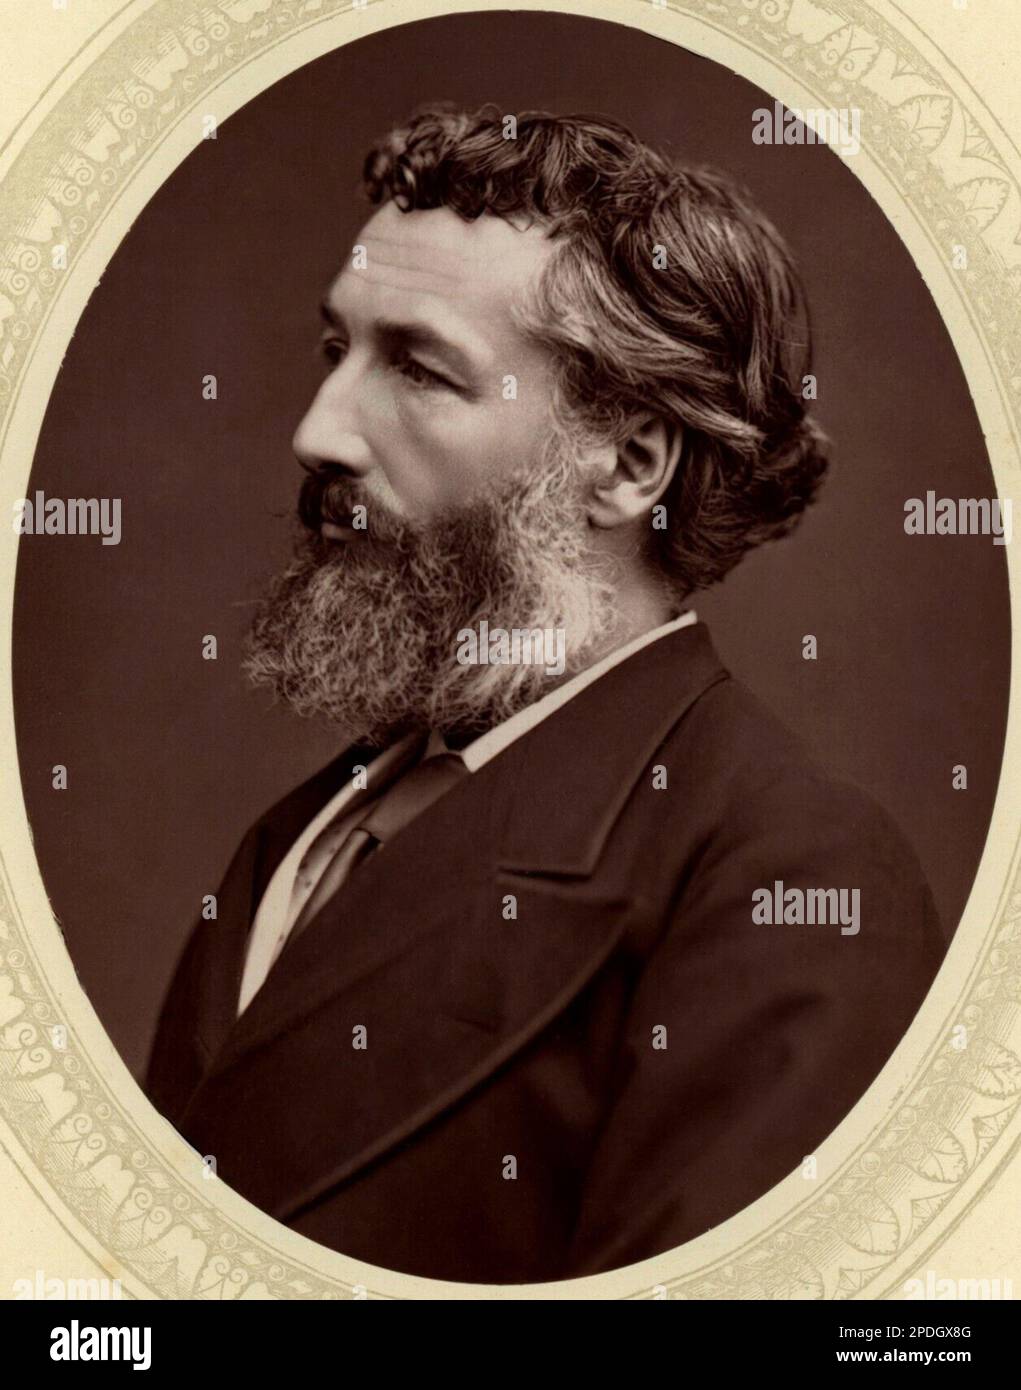 1875 ca , GREAT BRITAIN : The celebrated british painter and sculptor  Lord Frederic LEIGHTON ( 1830 - 1896 ) , influenced by the Pre-Raphaellite movement . Portrait by Lock & Whitfield , London .  HISTORY - FOTO STORICHE - PAINTER - PITTORE - ARTS - ART - ARTE - beard - barba - profilo - profile - LGBTQ - GAY --- ARCHIVIO GBB Stock Photo